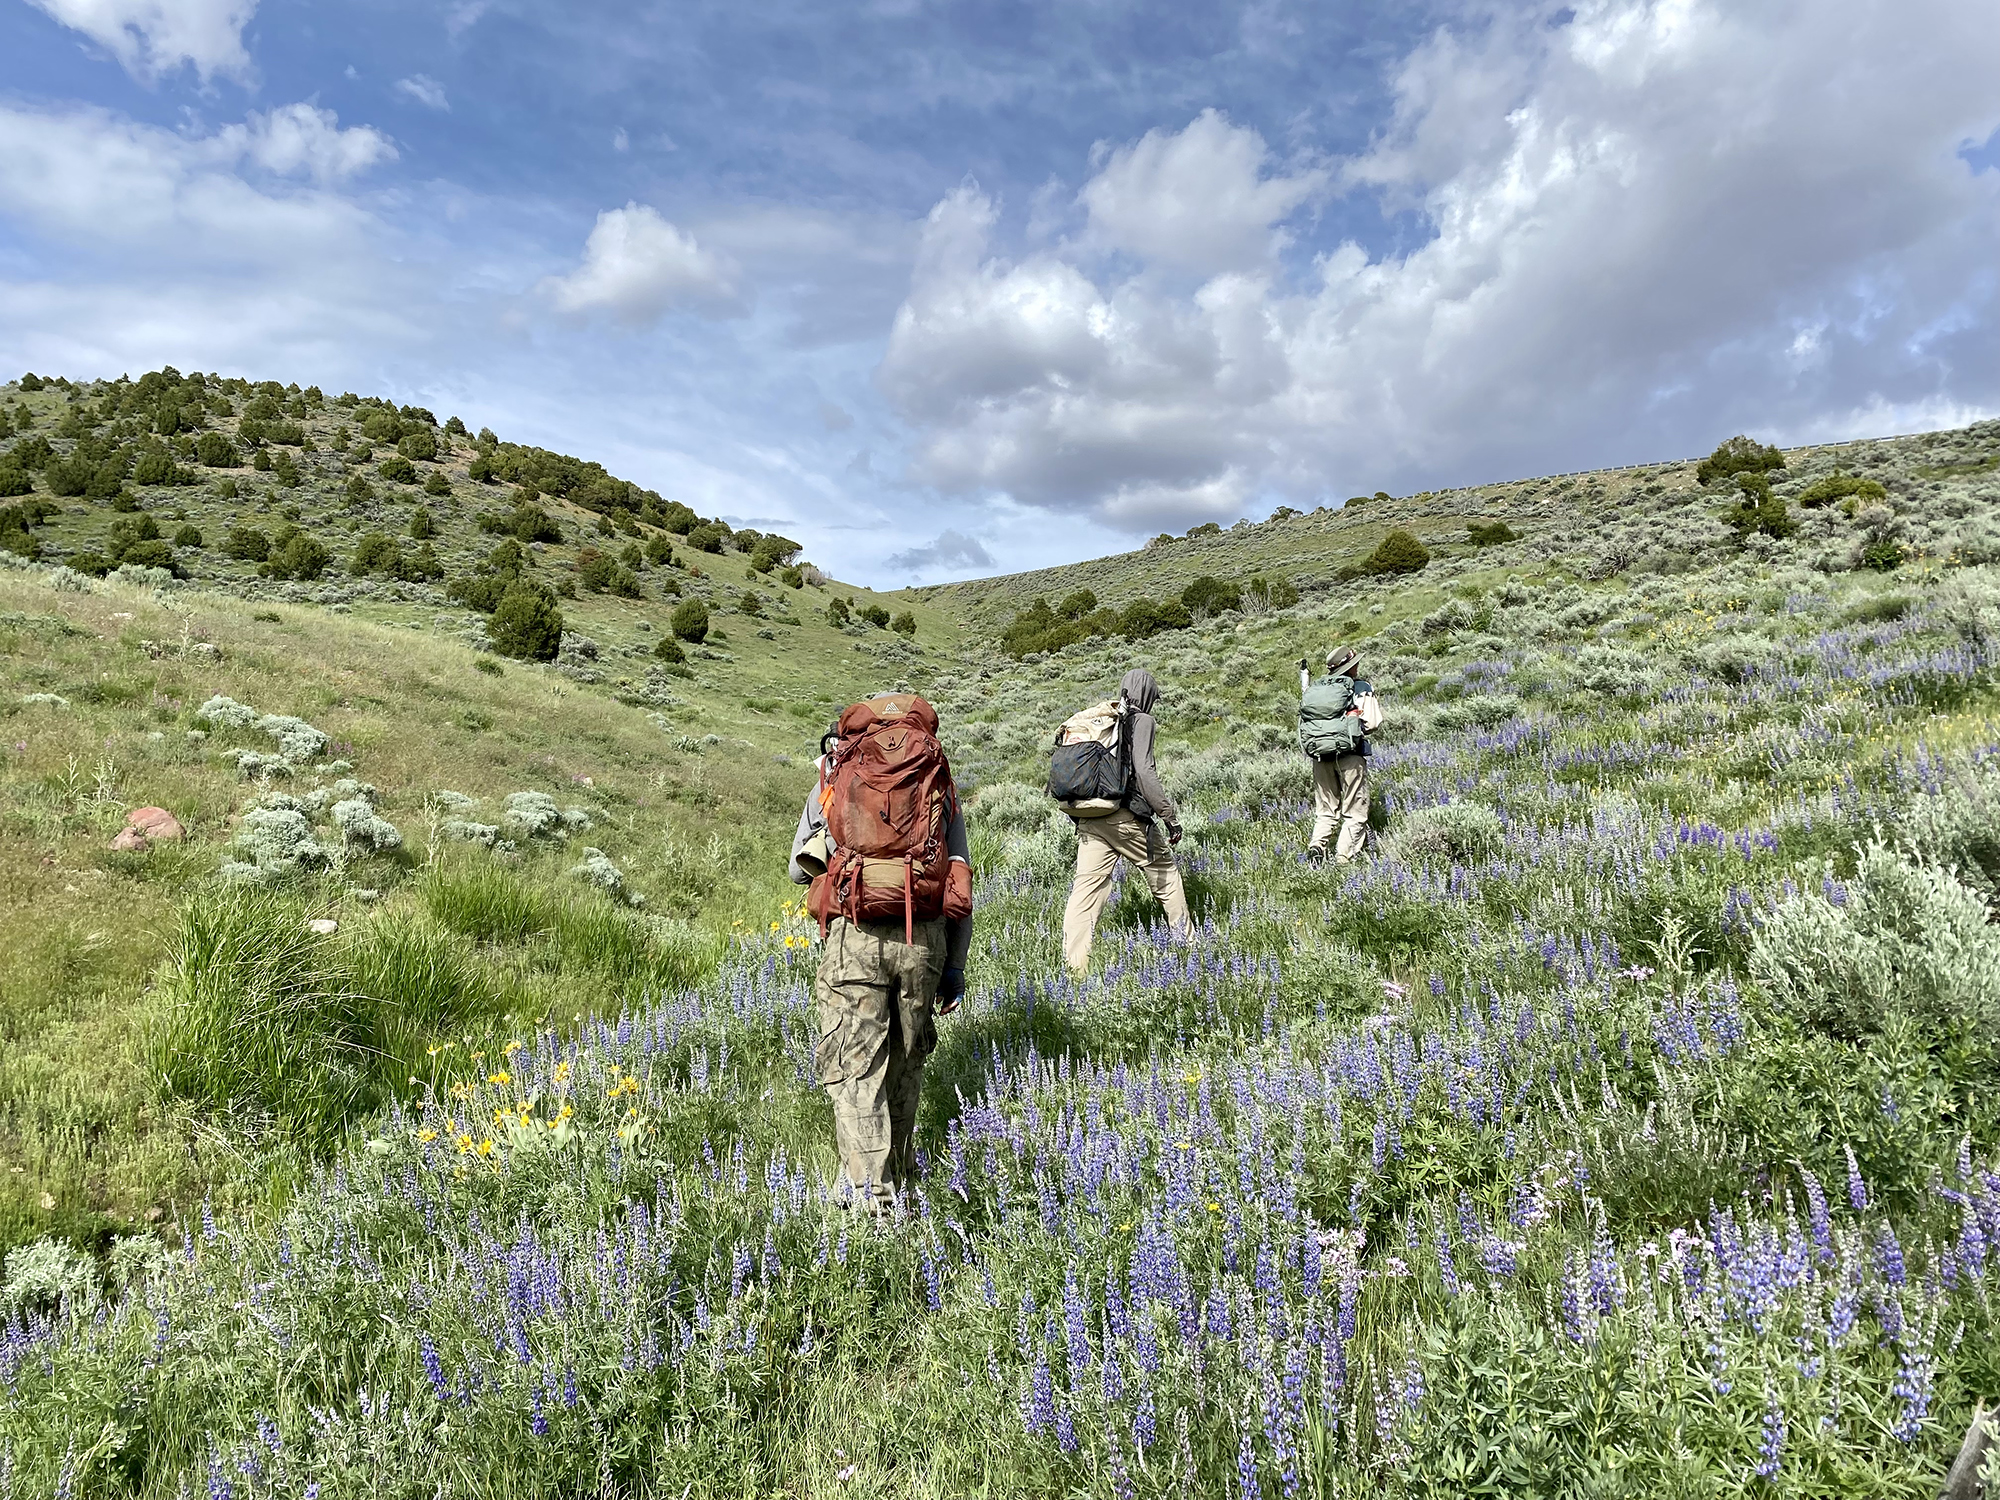  Three people wearing backpacks hiking up a grassy hill with colorful wildflowers.